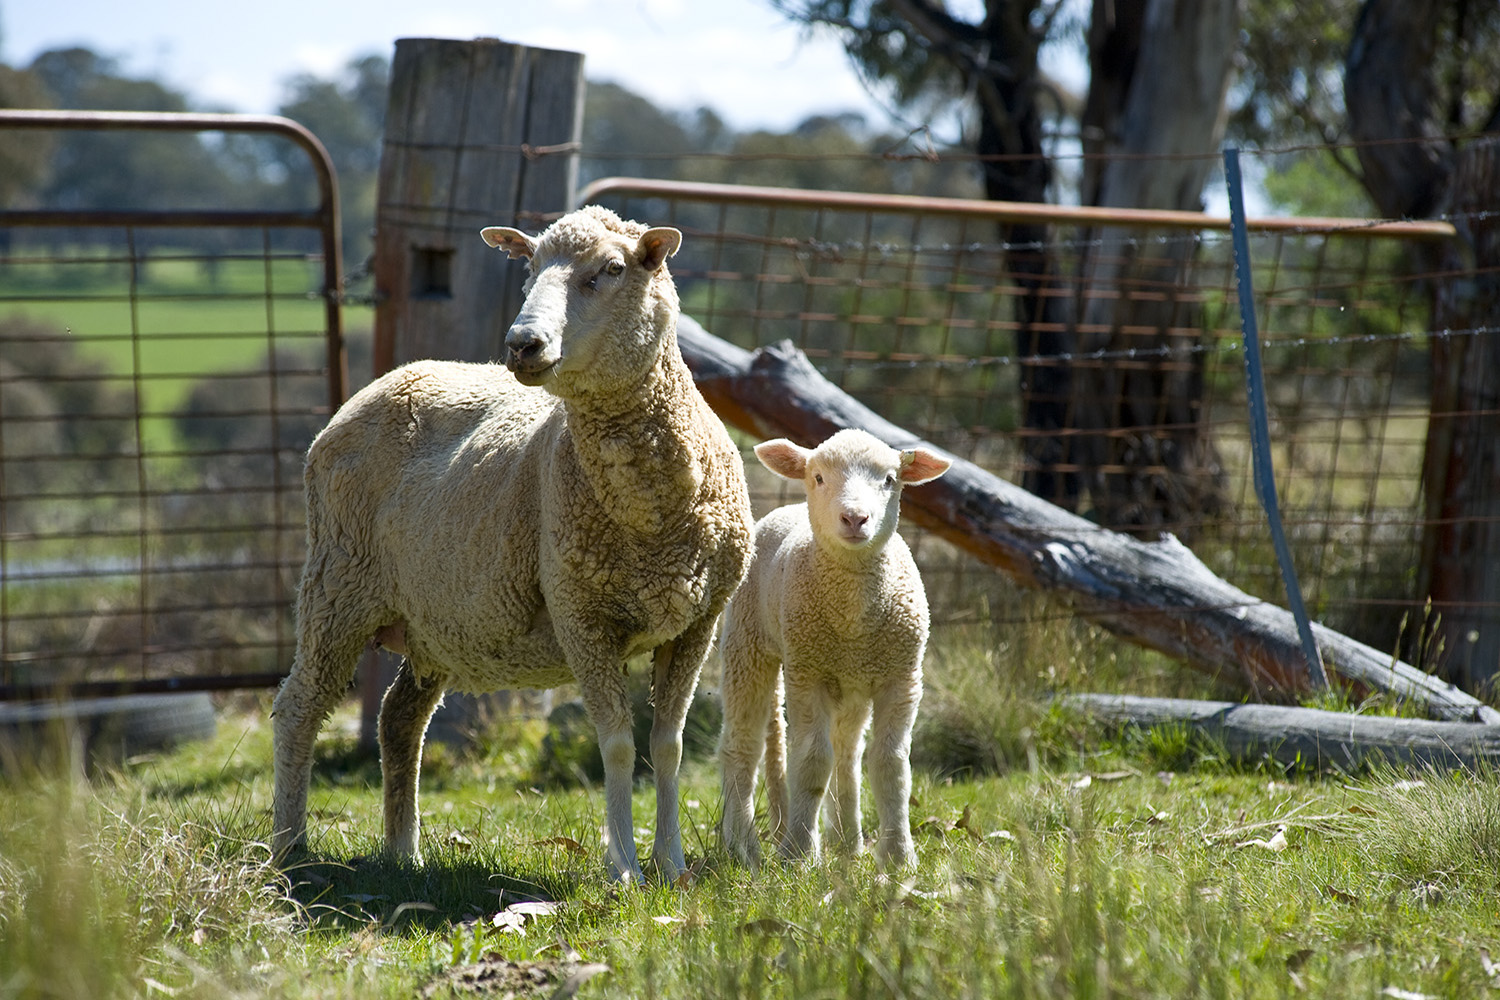 image of AARONTAIT COPYRIGHTED 2014 383  RURAL PHOTOGRAPHER FARM LIFE AGRICULTURE WOOL BEEF STOCKMAN MUSTER CATTLE FARM AUSTRALIAN EWE LAMB 